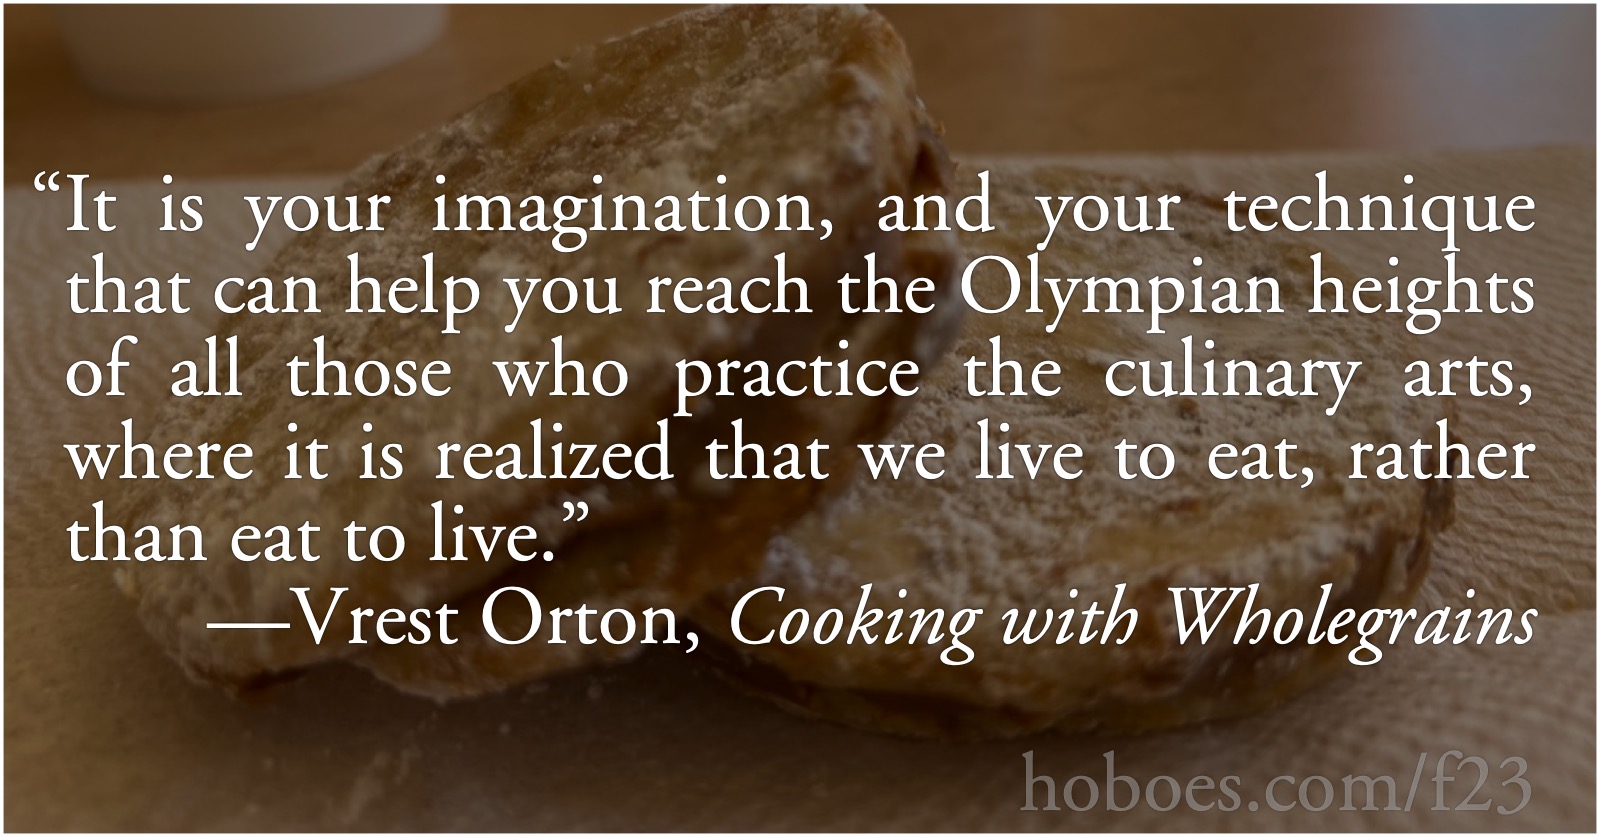 Live to Eat: “It is your imagination, and your technique that can help you reach the Olympian heights of all those who practice the culinary arts, where it is realized that we live to eat, rather than eat to live.”—Vrest Orton, Cooking with Wholegrains; life; cooking; Mildred and Vrest Orton